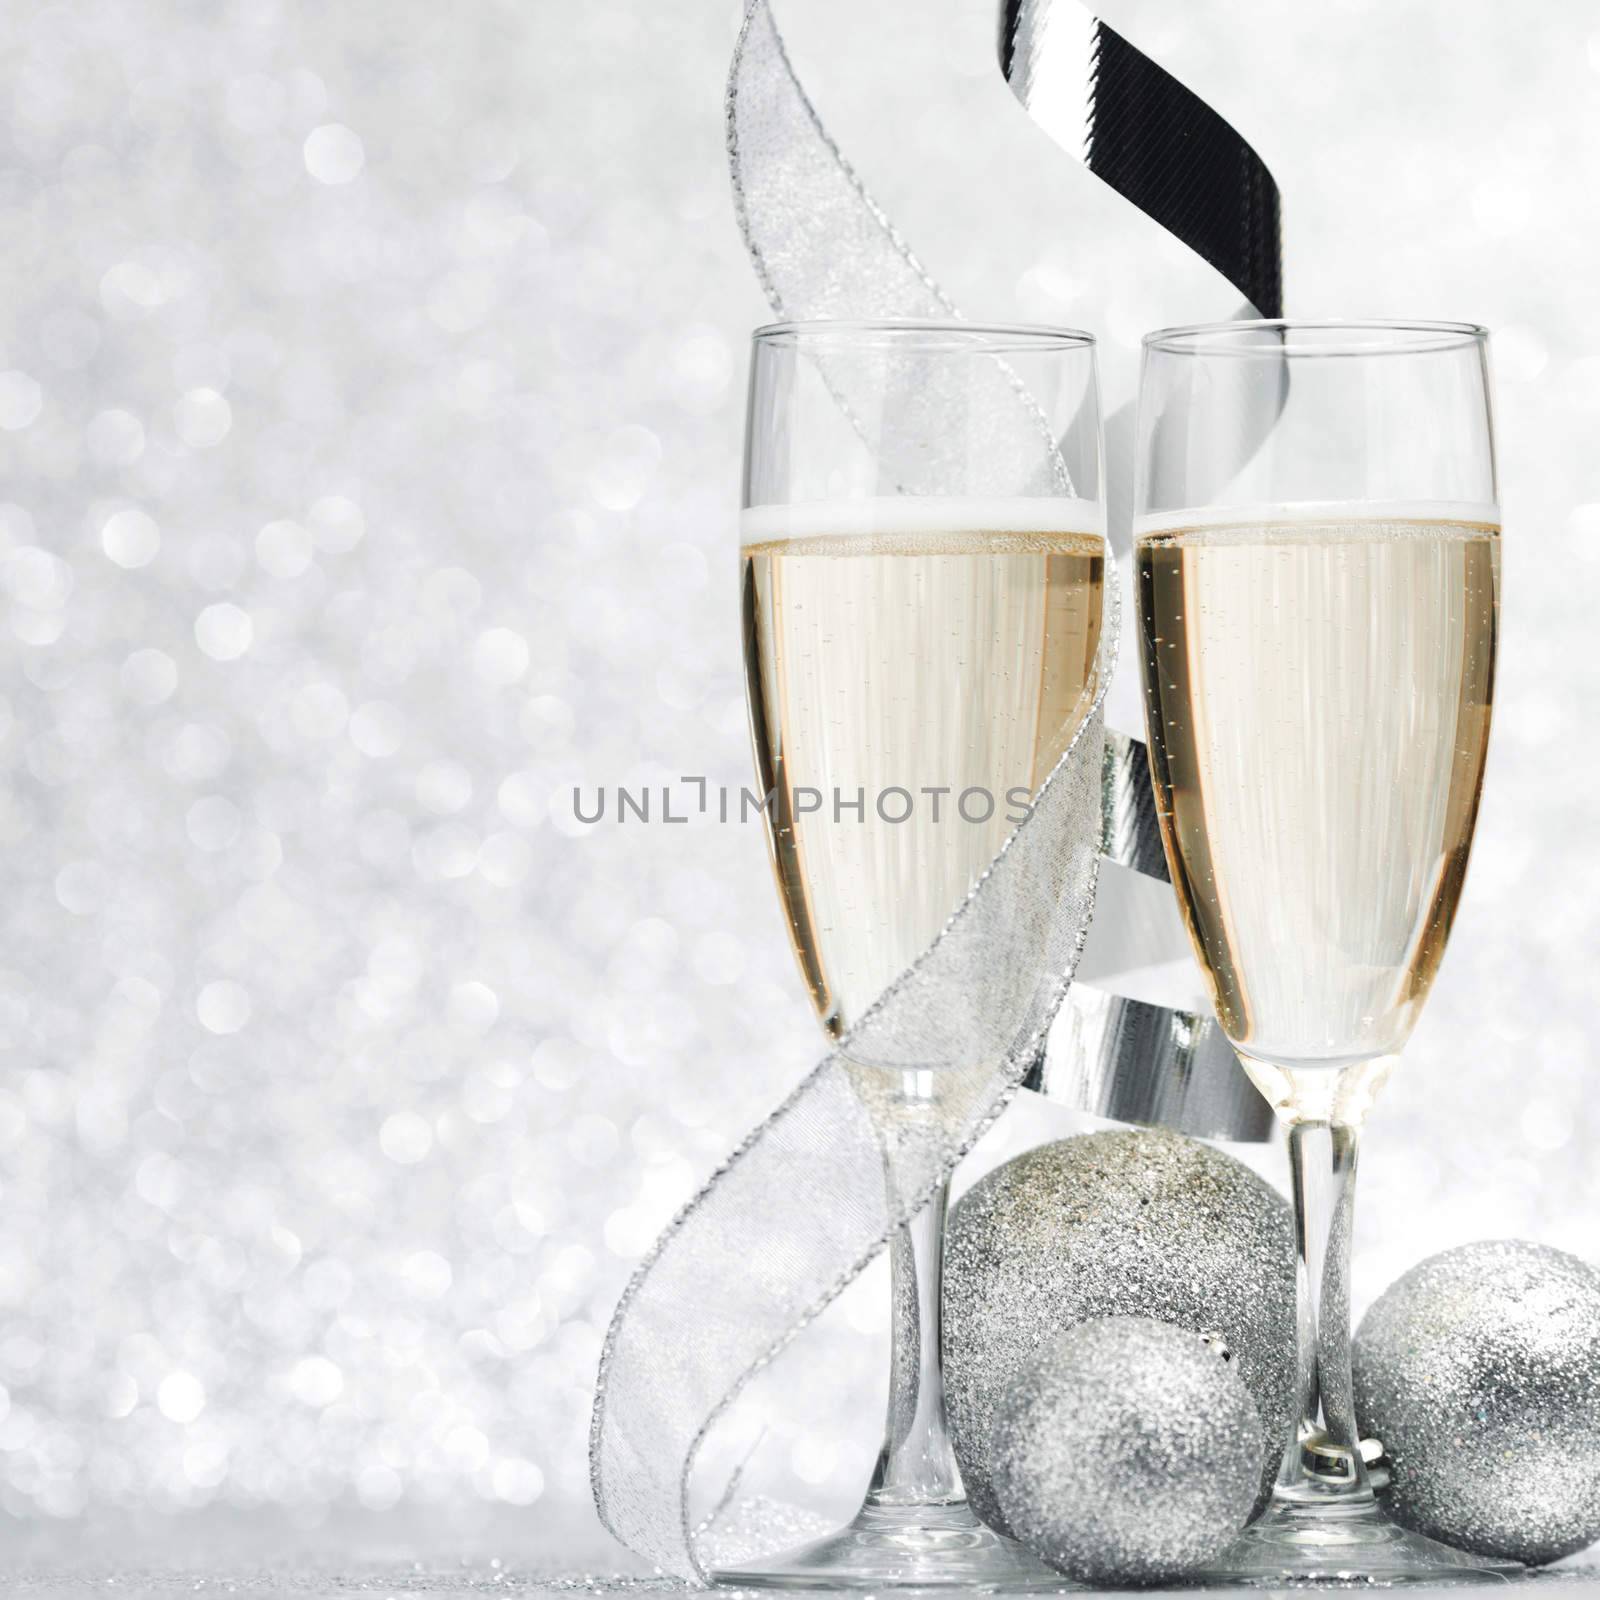 Champagne and new year decor on silver bokeh background